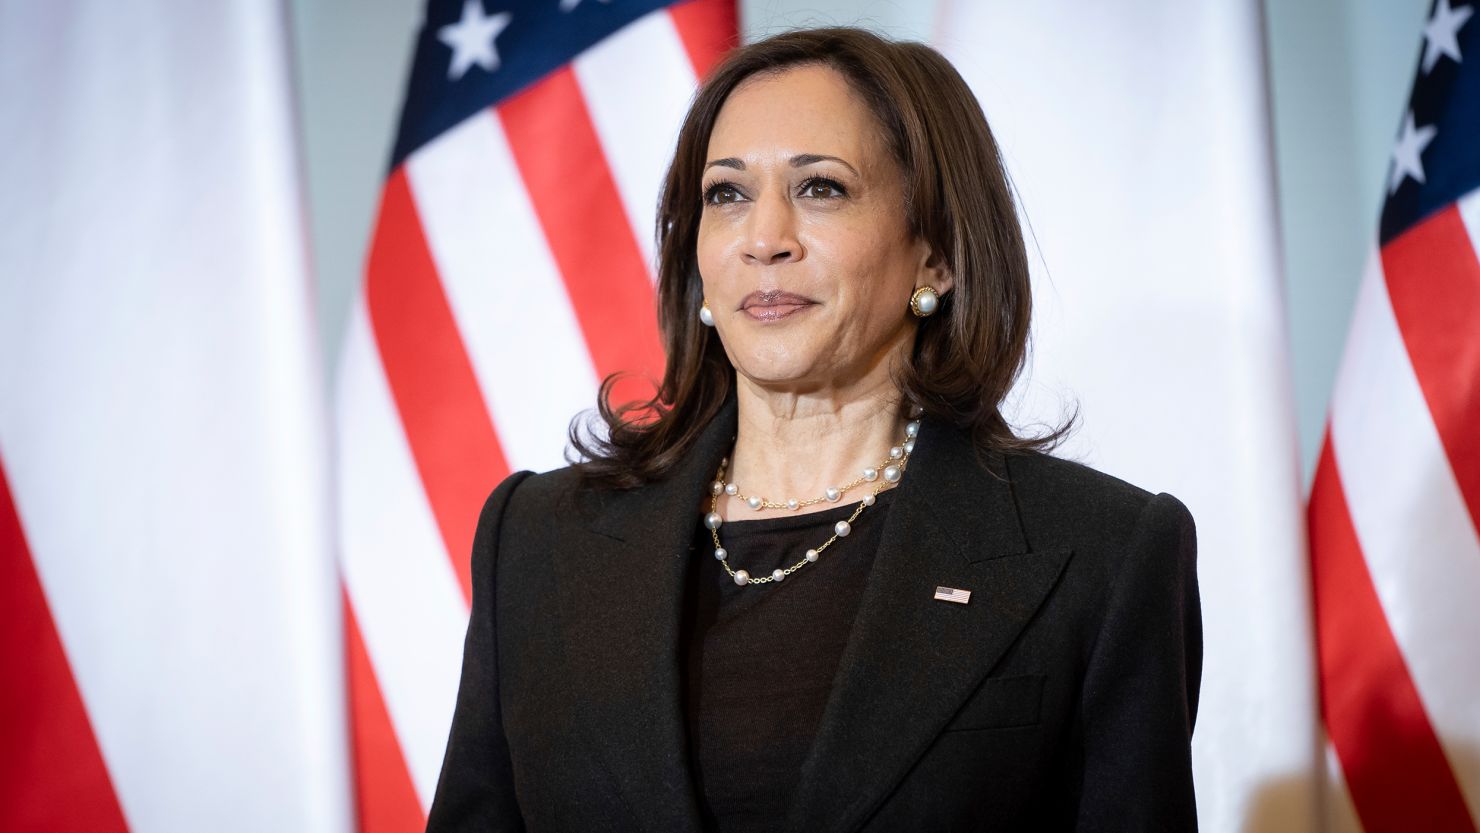 US Vice President Kamala Harris in Warsaw, Poland, on March 10, 2022.